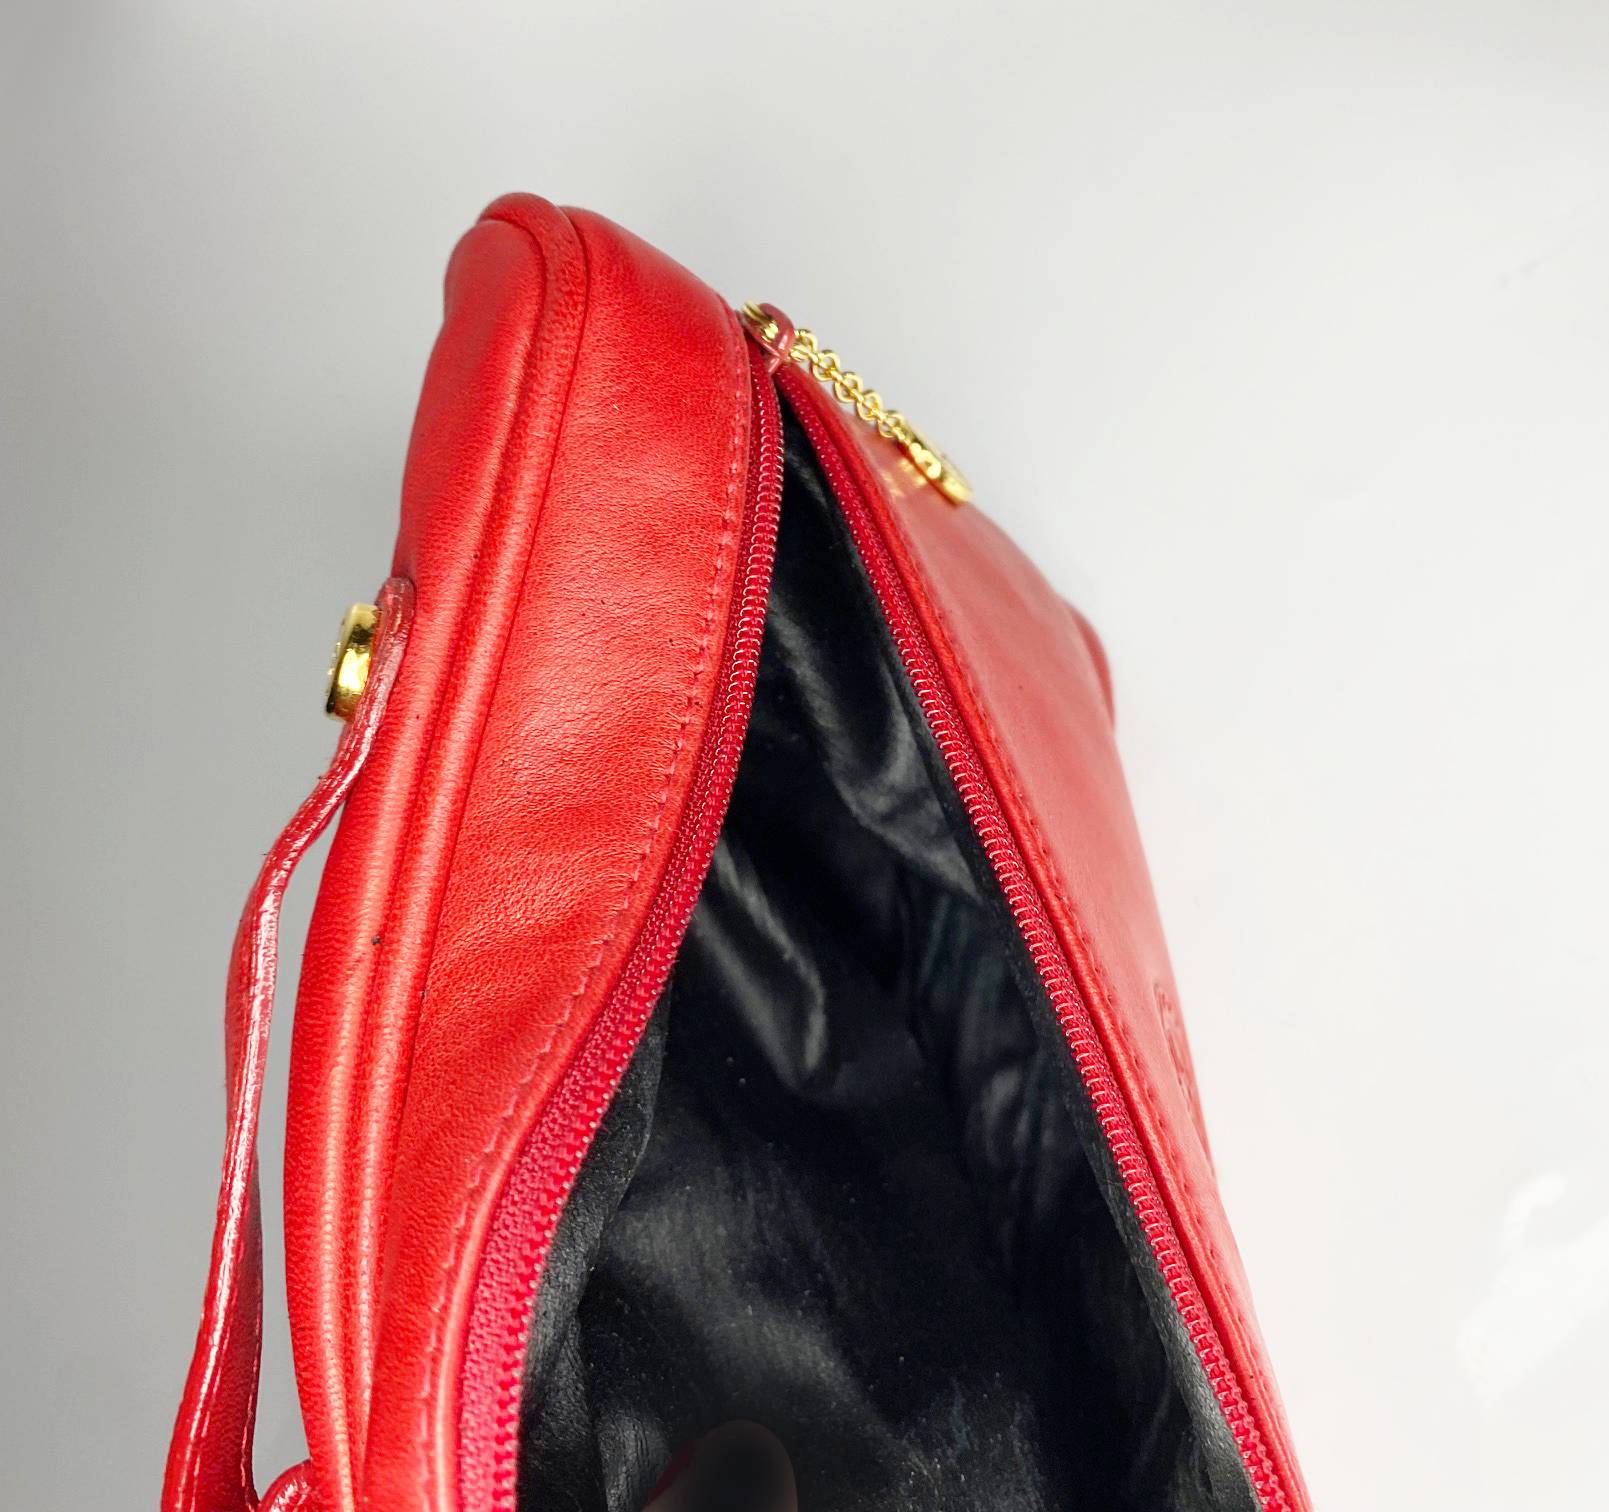 1980s Gucci Red Nappa Leather Pouch Handbag - style - CHNGR